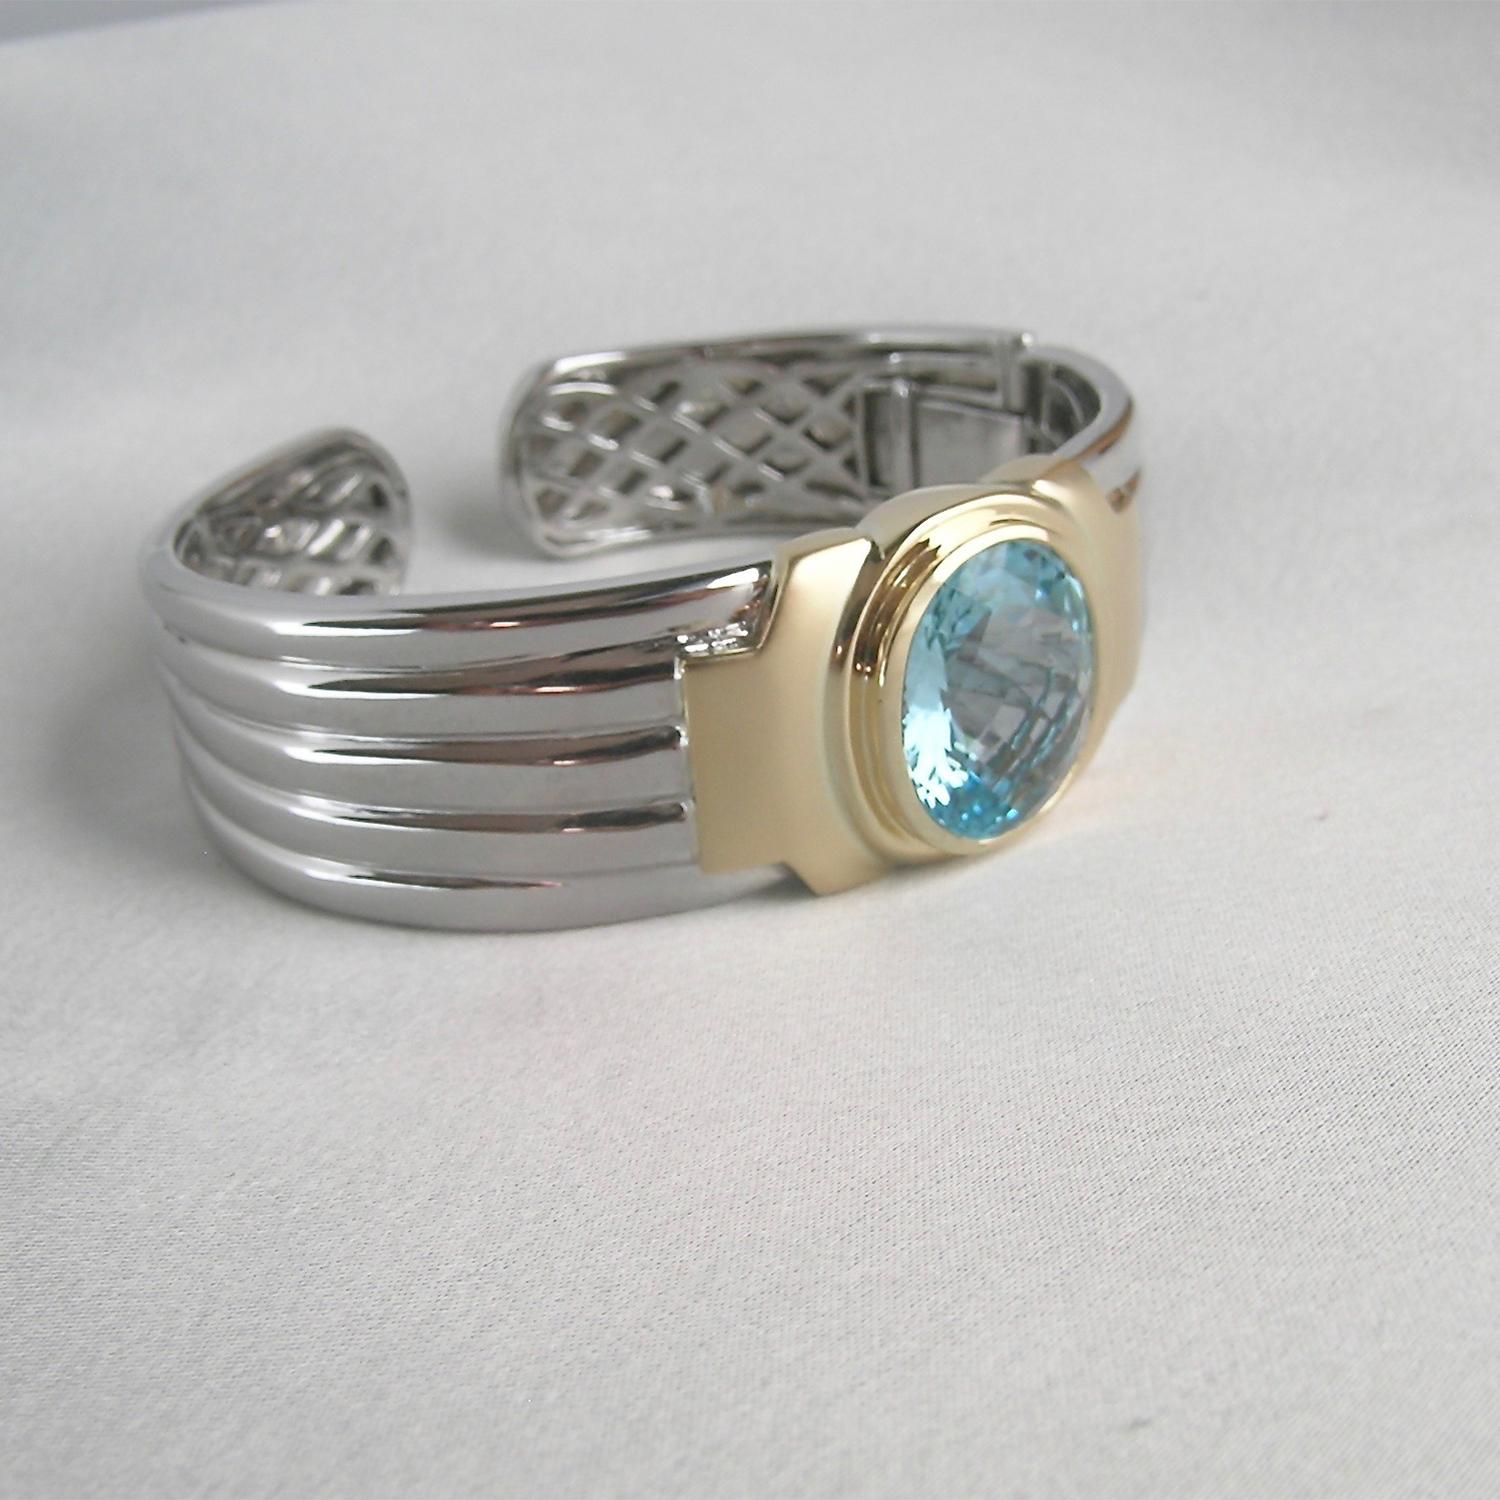 The mixing of silver with gold is a new direction for Nancy.  This beautiful and substantial cuff/bracelet can be worn by a man or woman.  Nancy has often combined white and yellow gold, but using silver gives a similar look at a much different